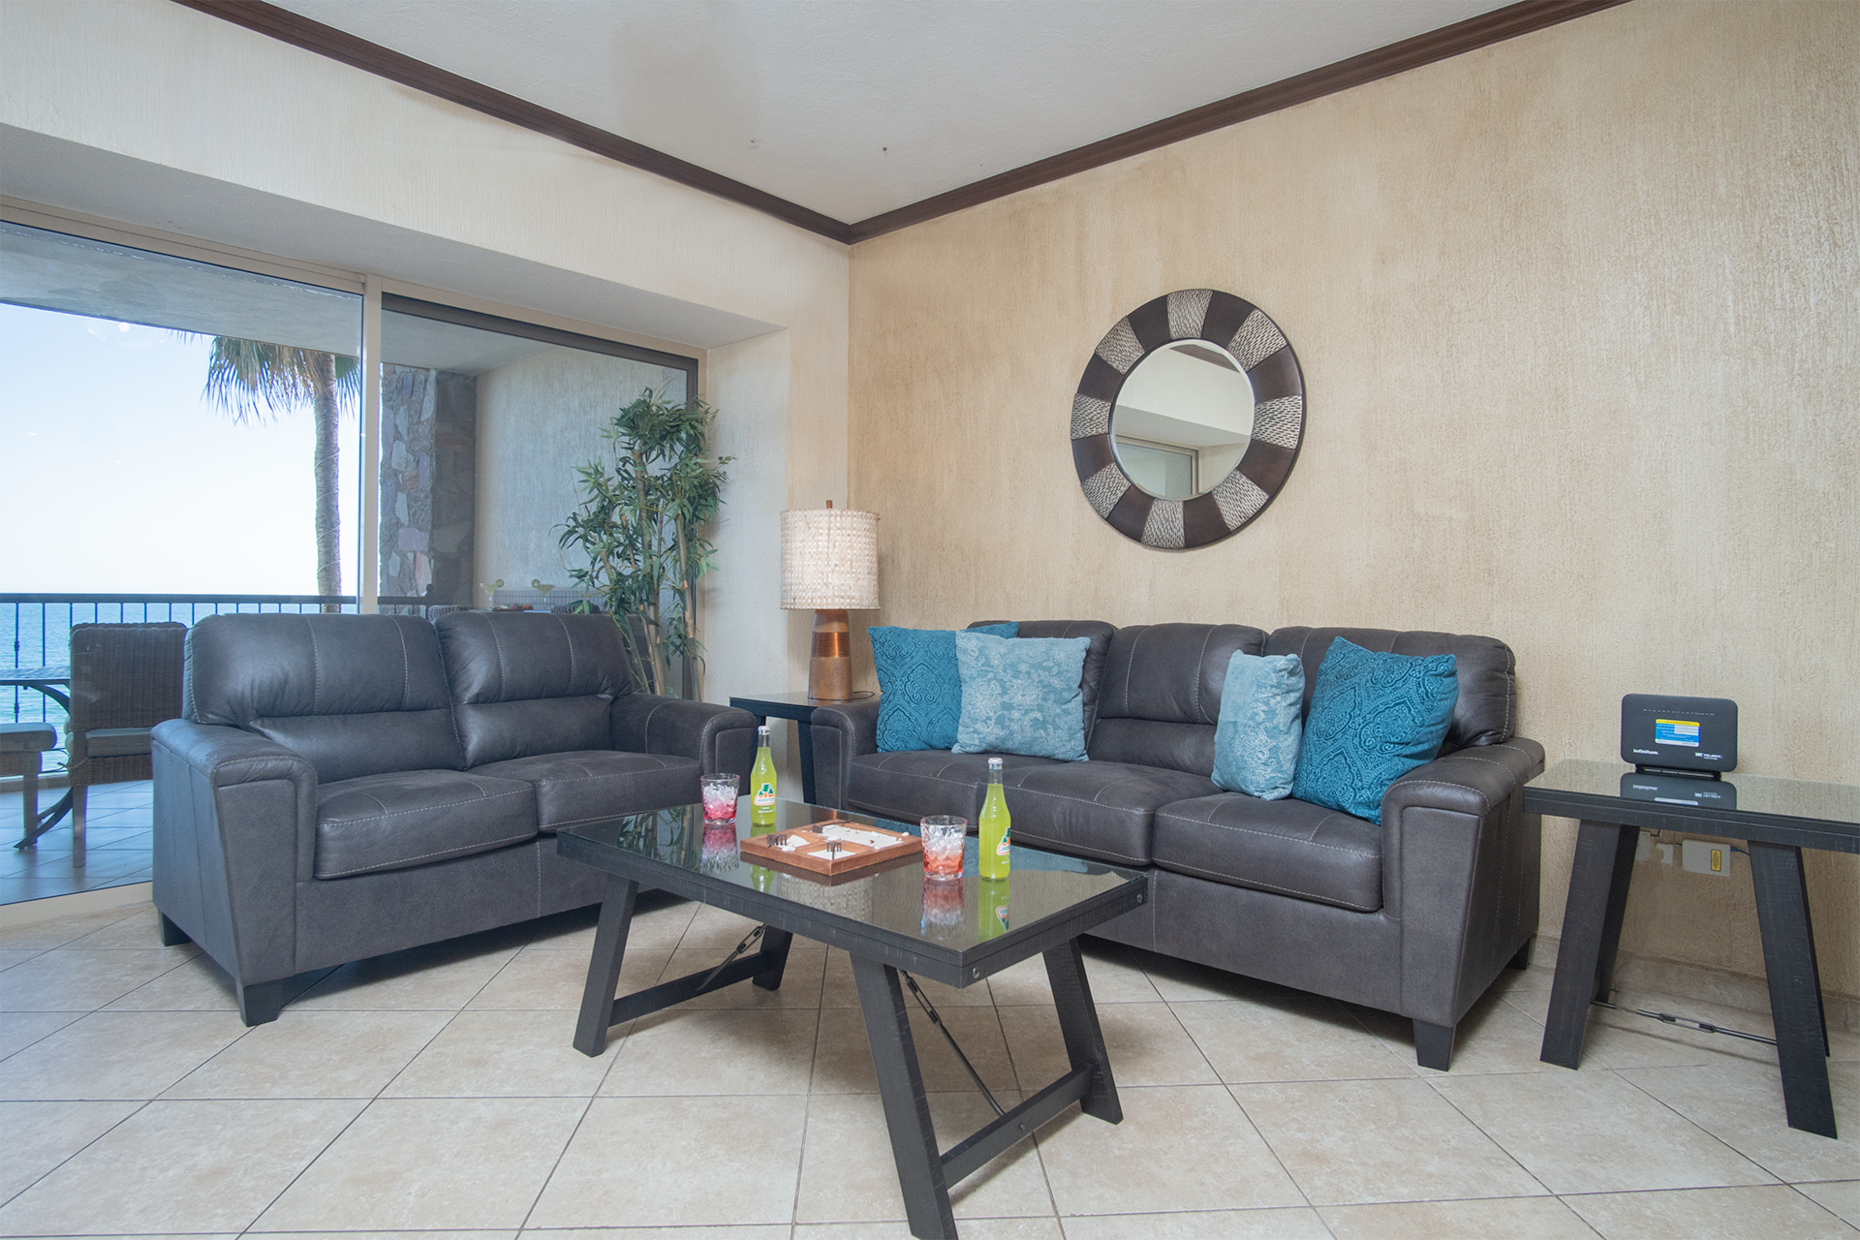 The living room has comfortable leather sofas.